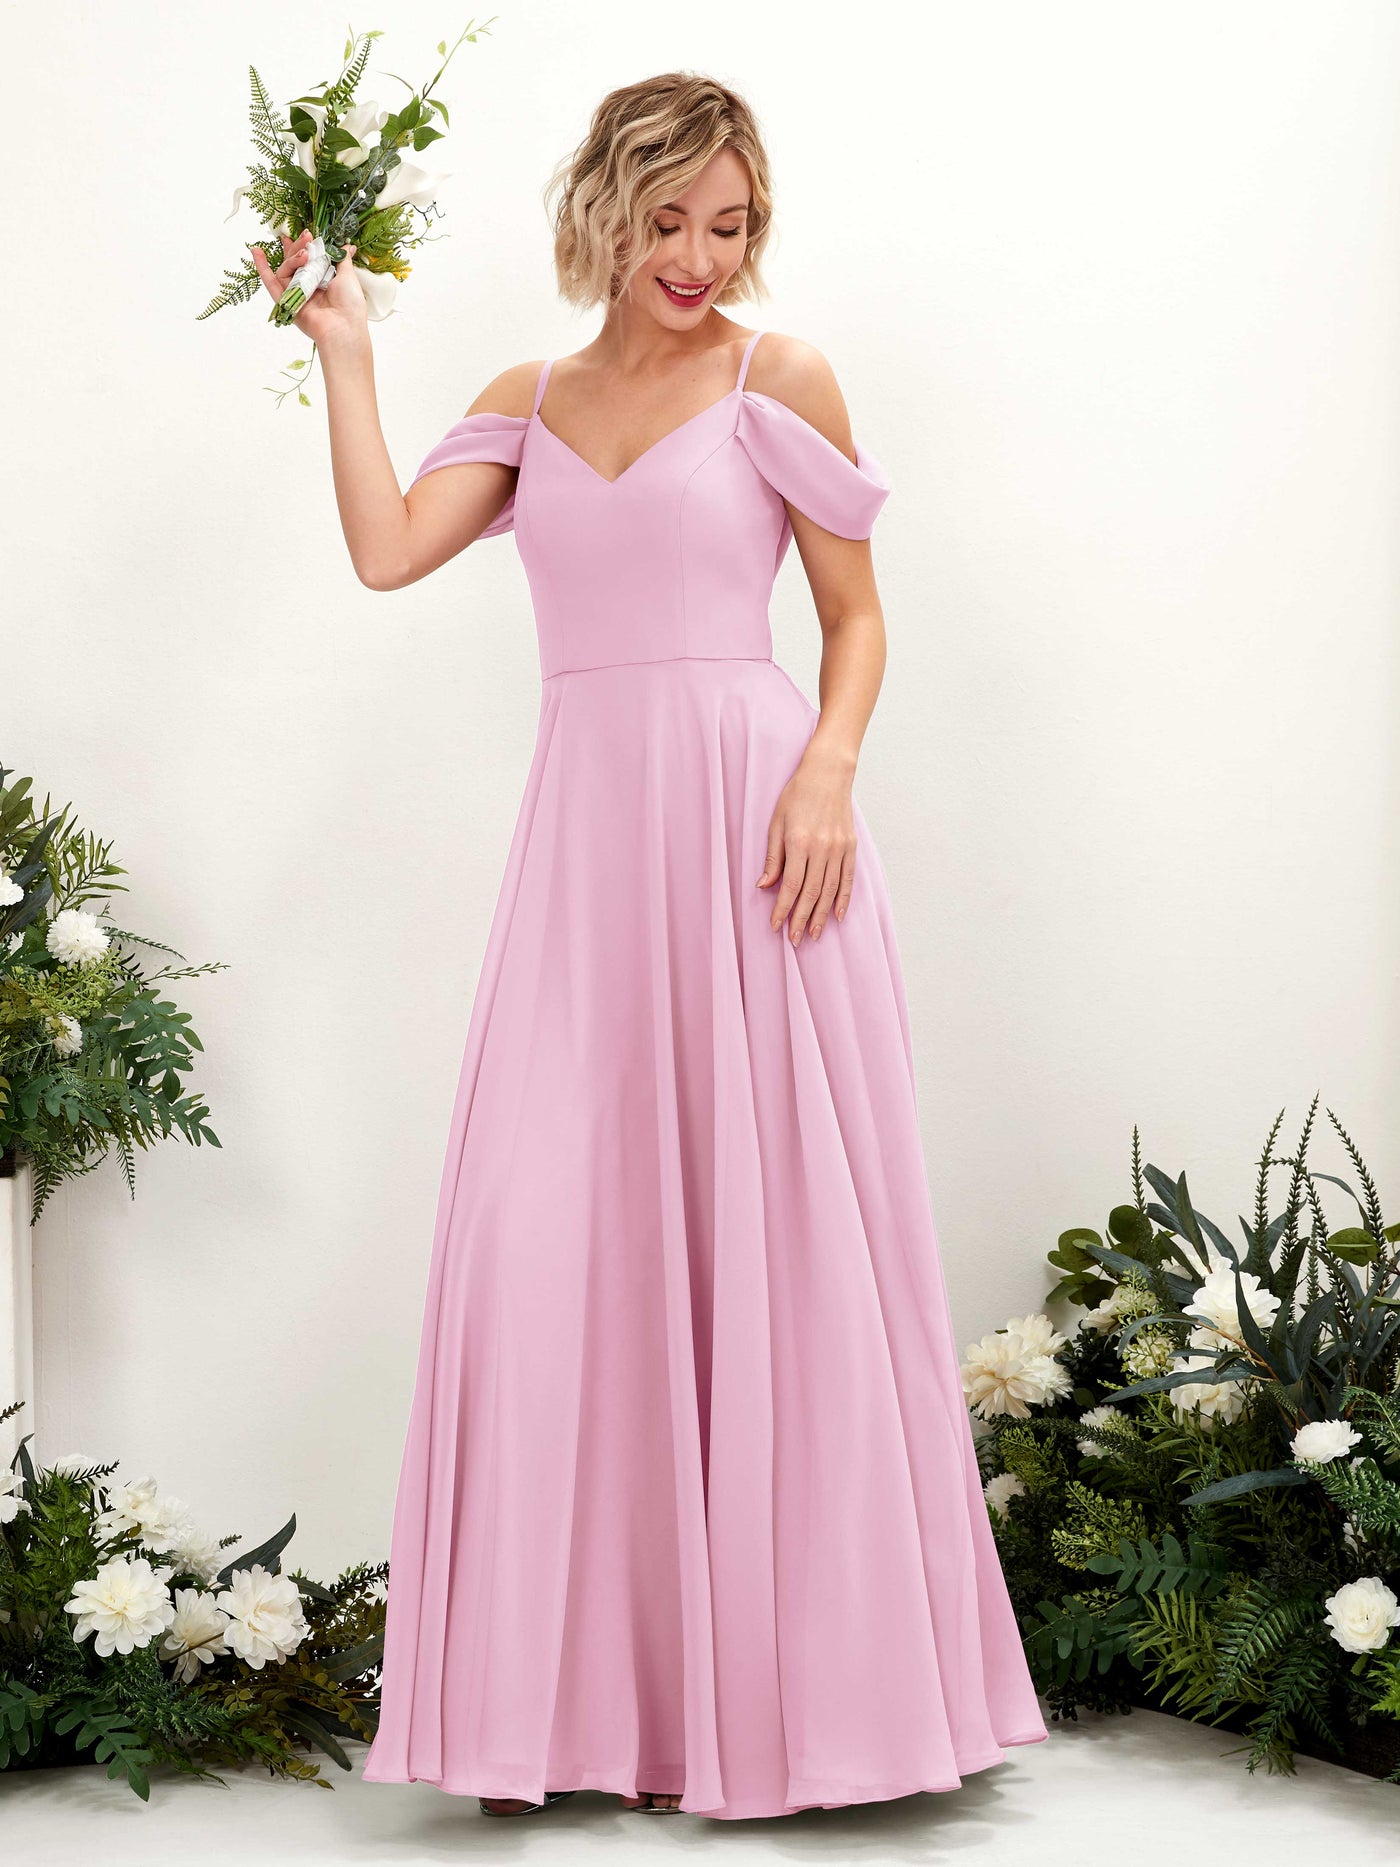 Candy Pink Bridesmaid Dresses Bridesmaid Dress A-line Chiffon Off Shoulder Full Length Sleeveless Wedding Party Dress (81224939)#color_candy-pink